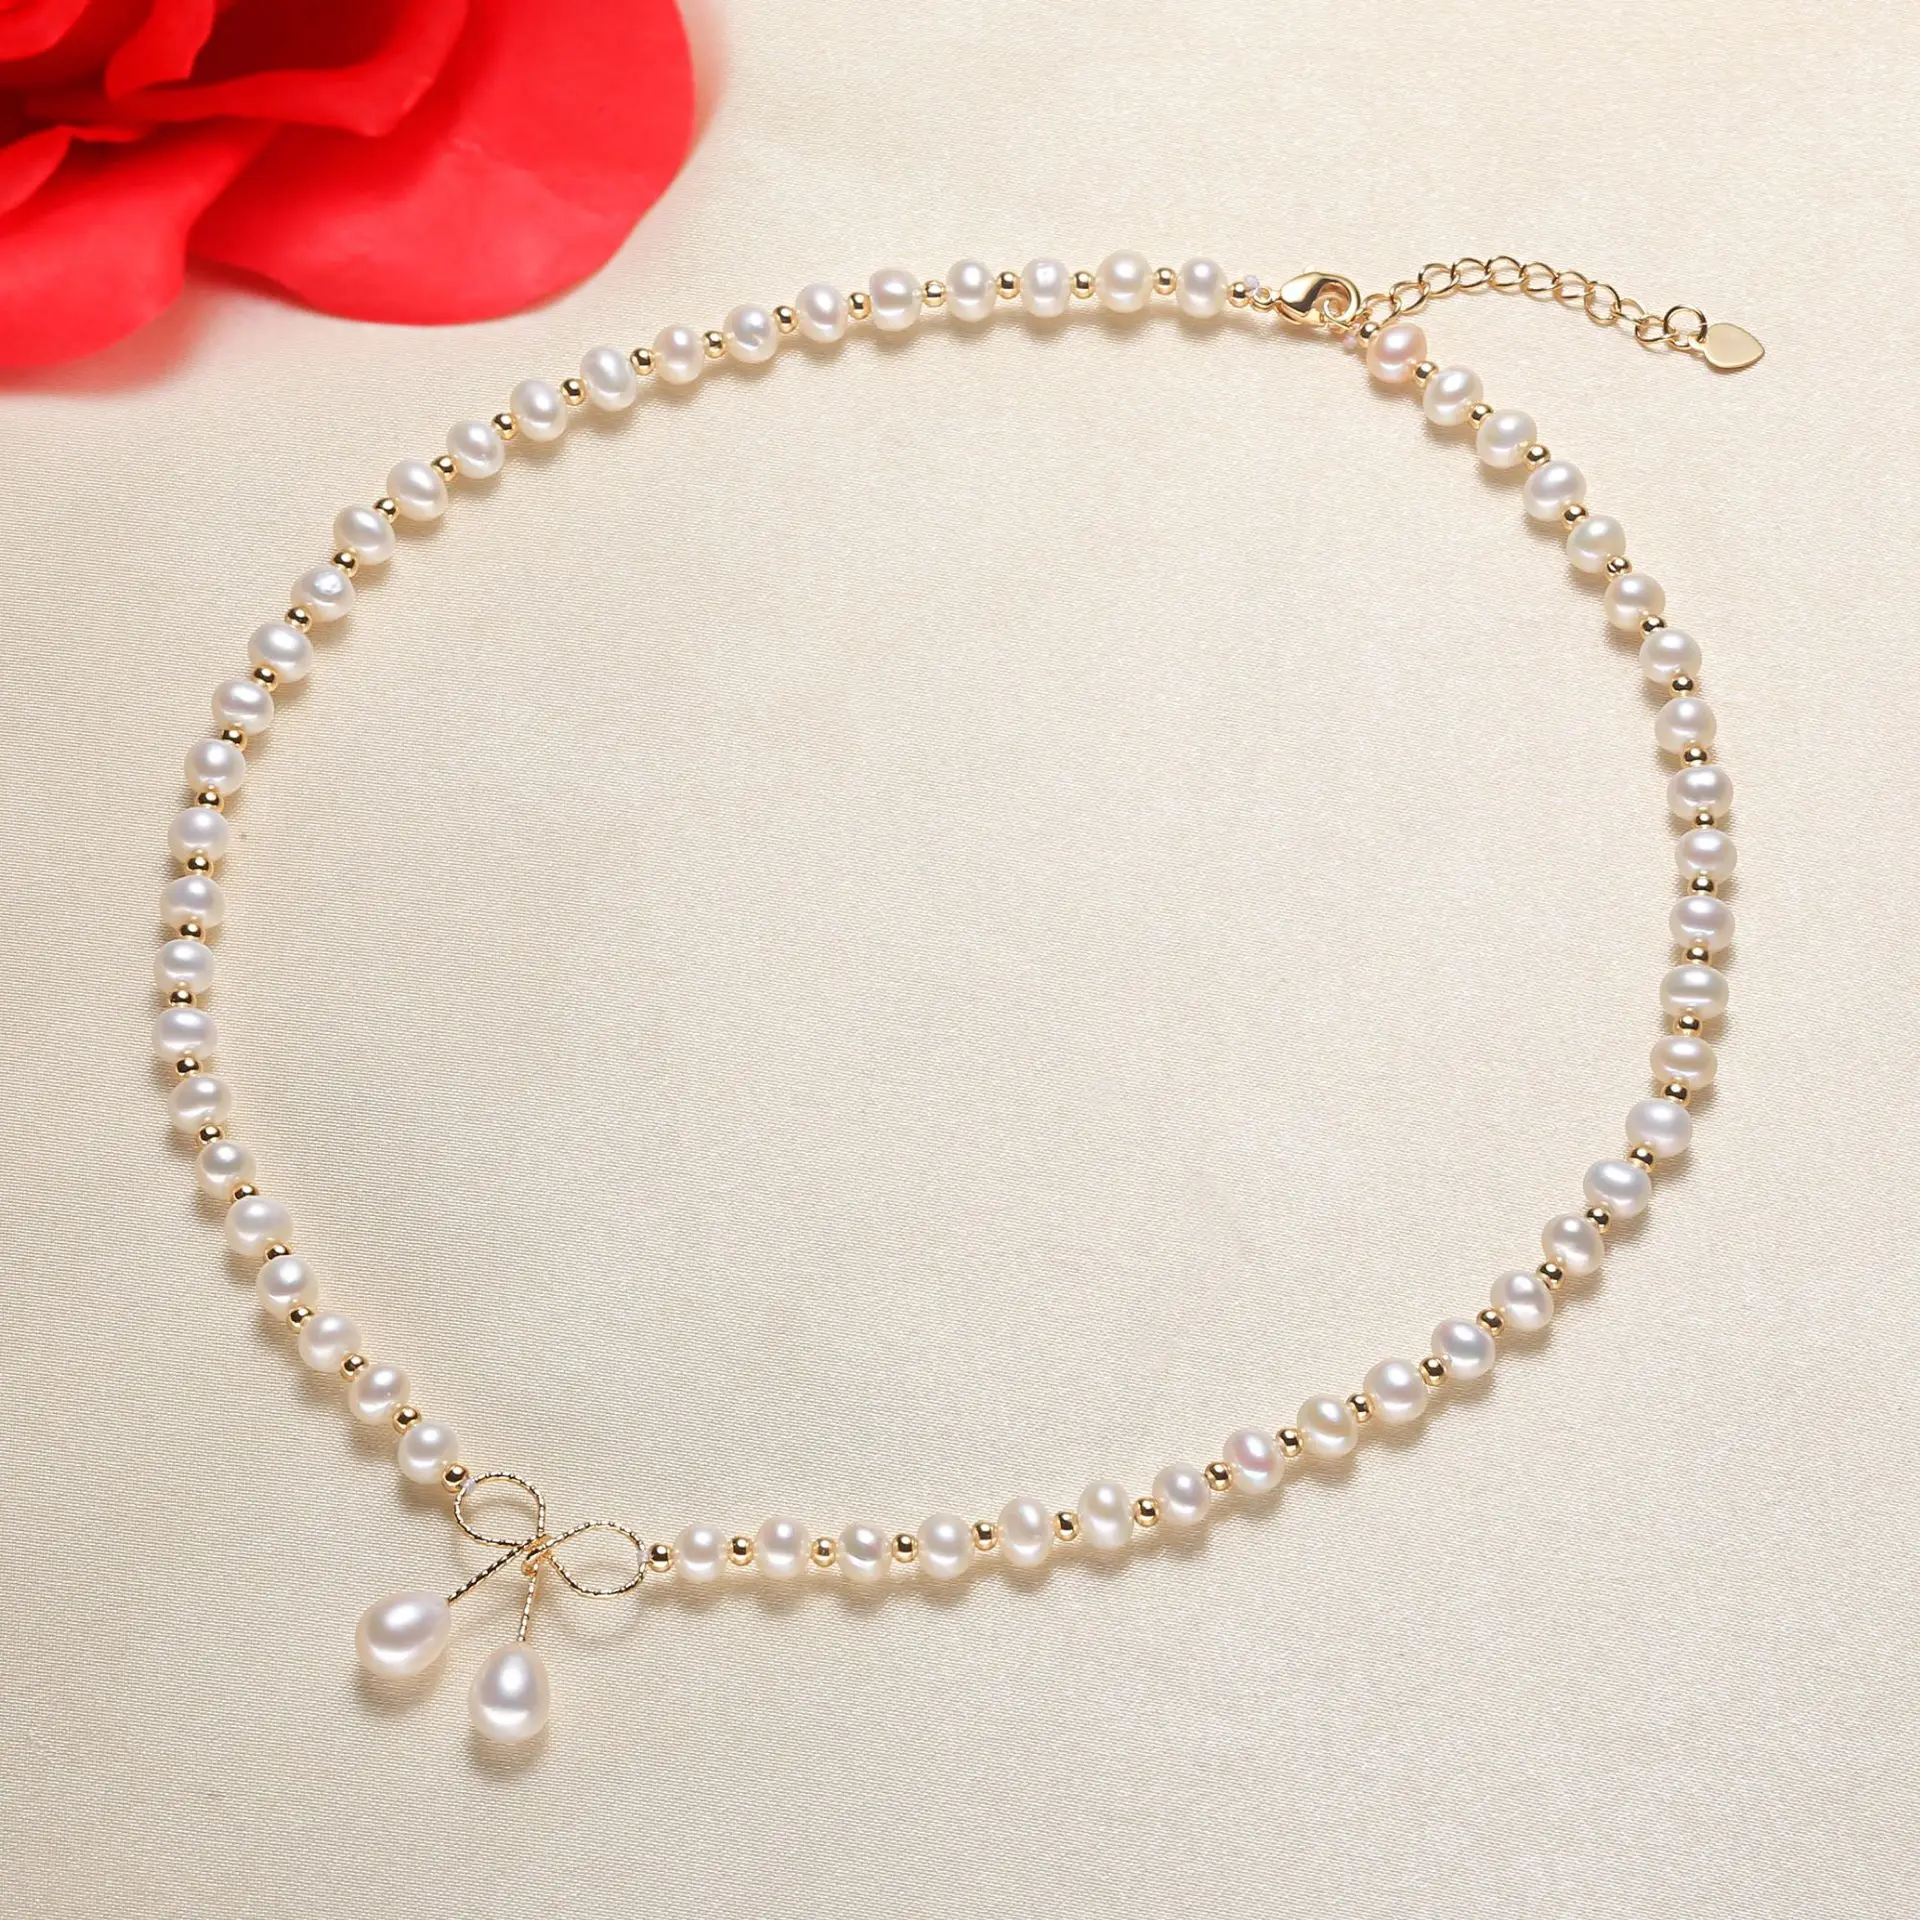 

5-6mm Natural Freshwater Baroque Pearl Necklace for Women 38-42cm Length Fashion Romantic Chokers Necklaces Girl Gift